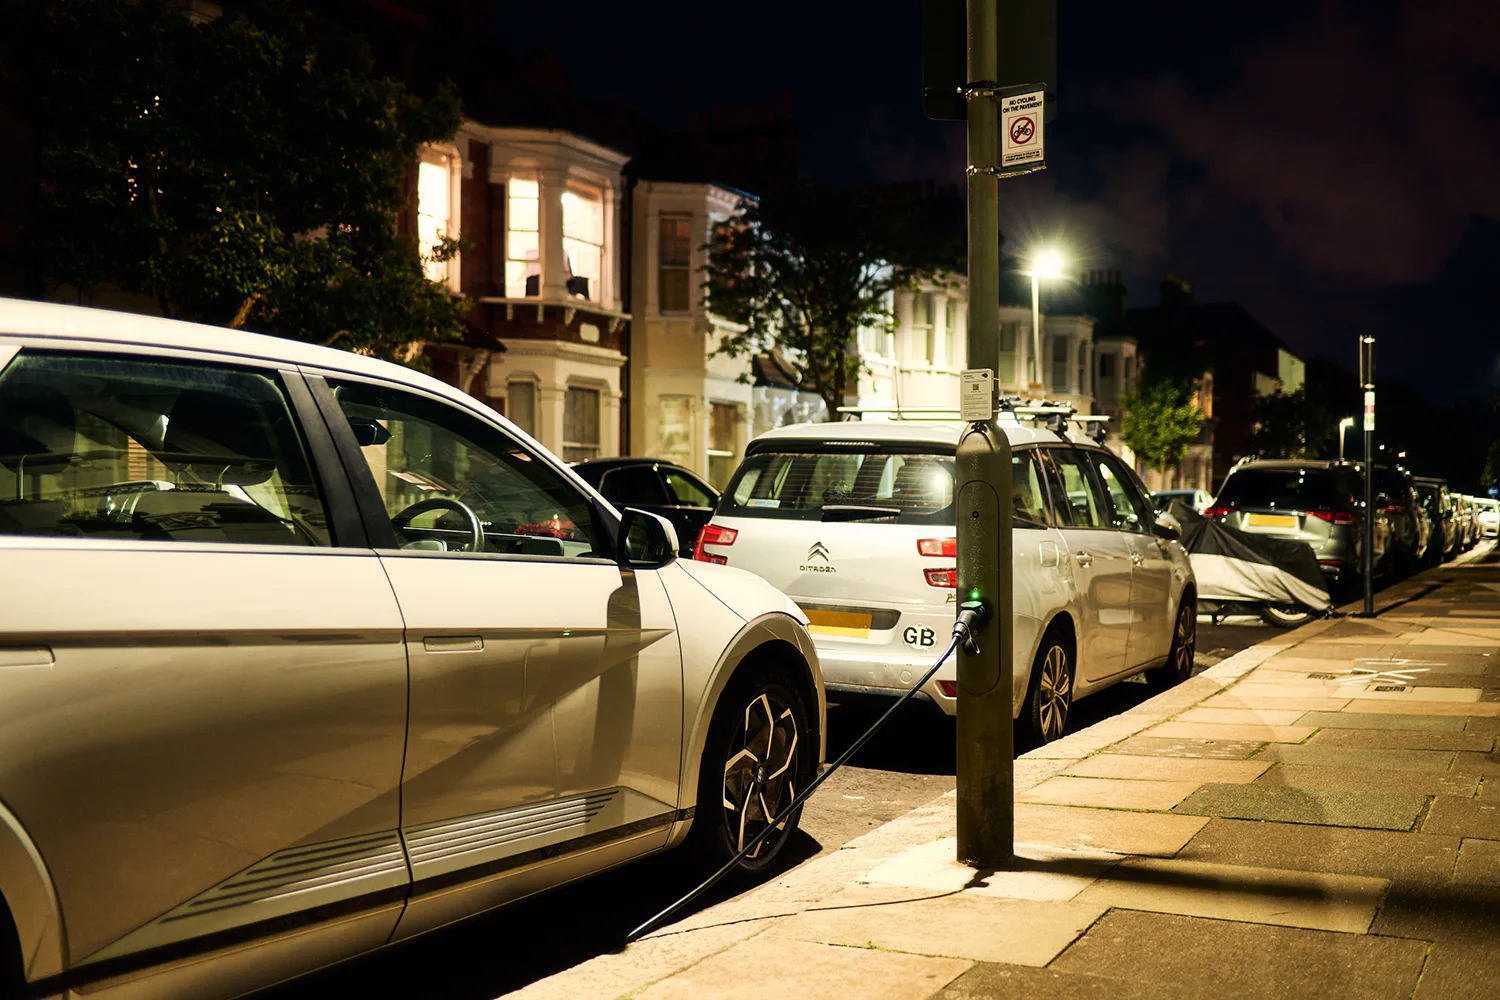 An electric vehicle is charging at a new ubitricity lamppost charging station in Richmond, London, UK.